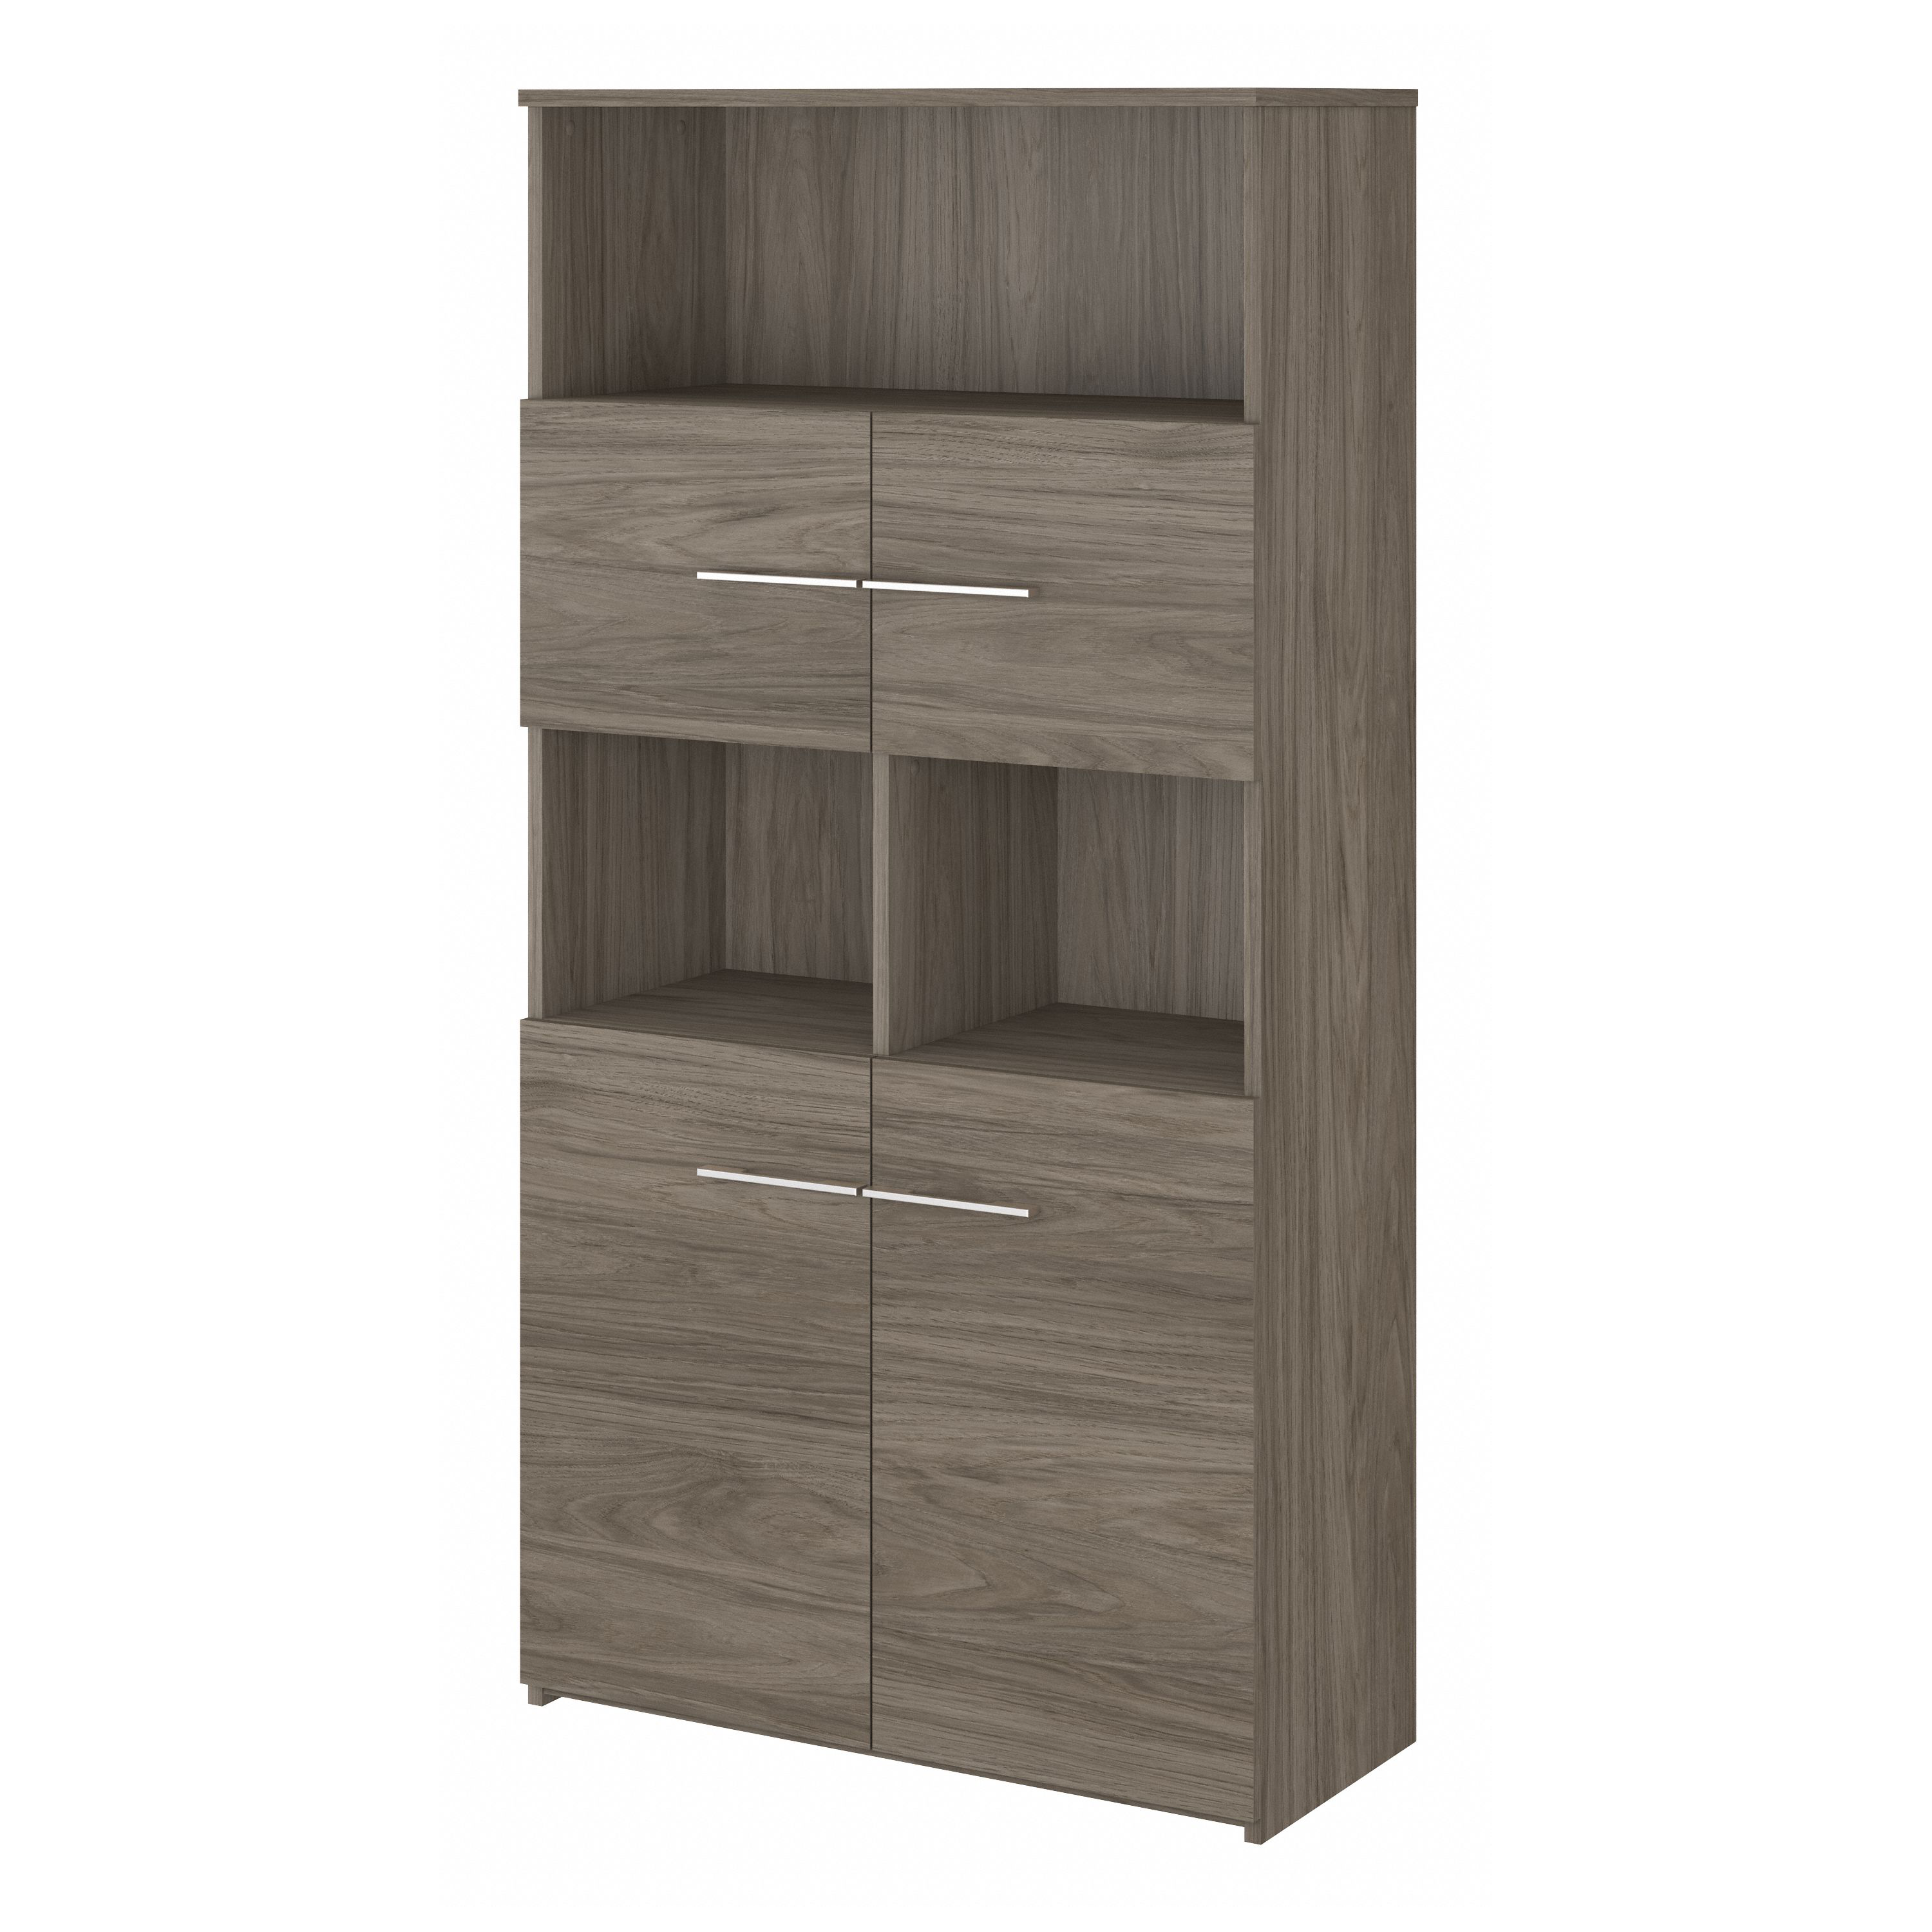 Shop Bush Business Furniture Office 500 5 Shelf Bookcase with Doors 02 OFB136MH #color_modern hickory